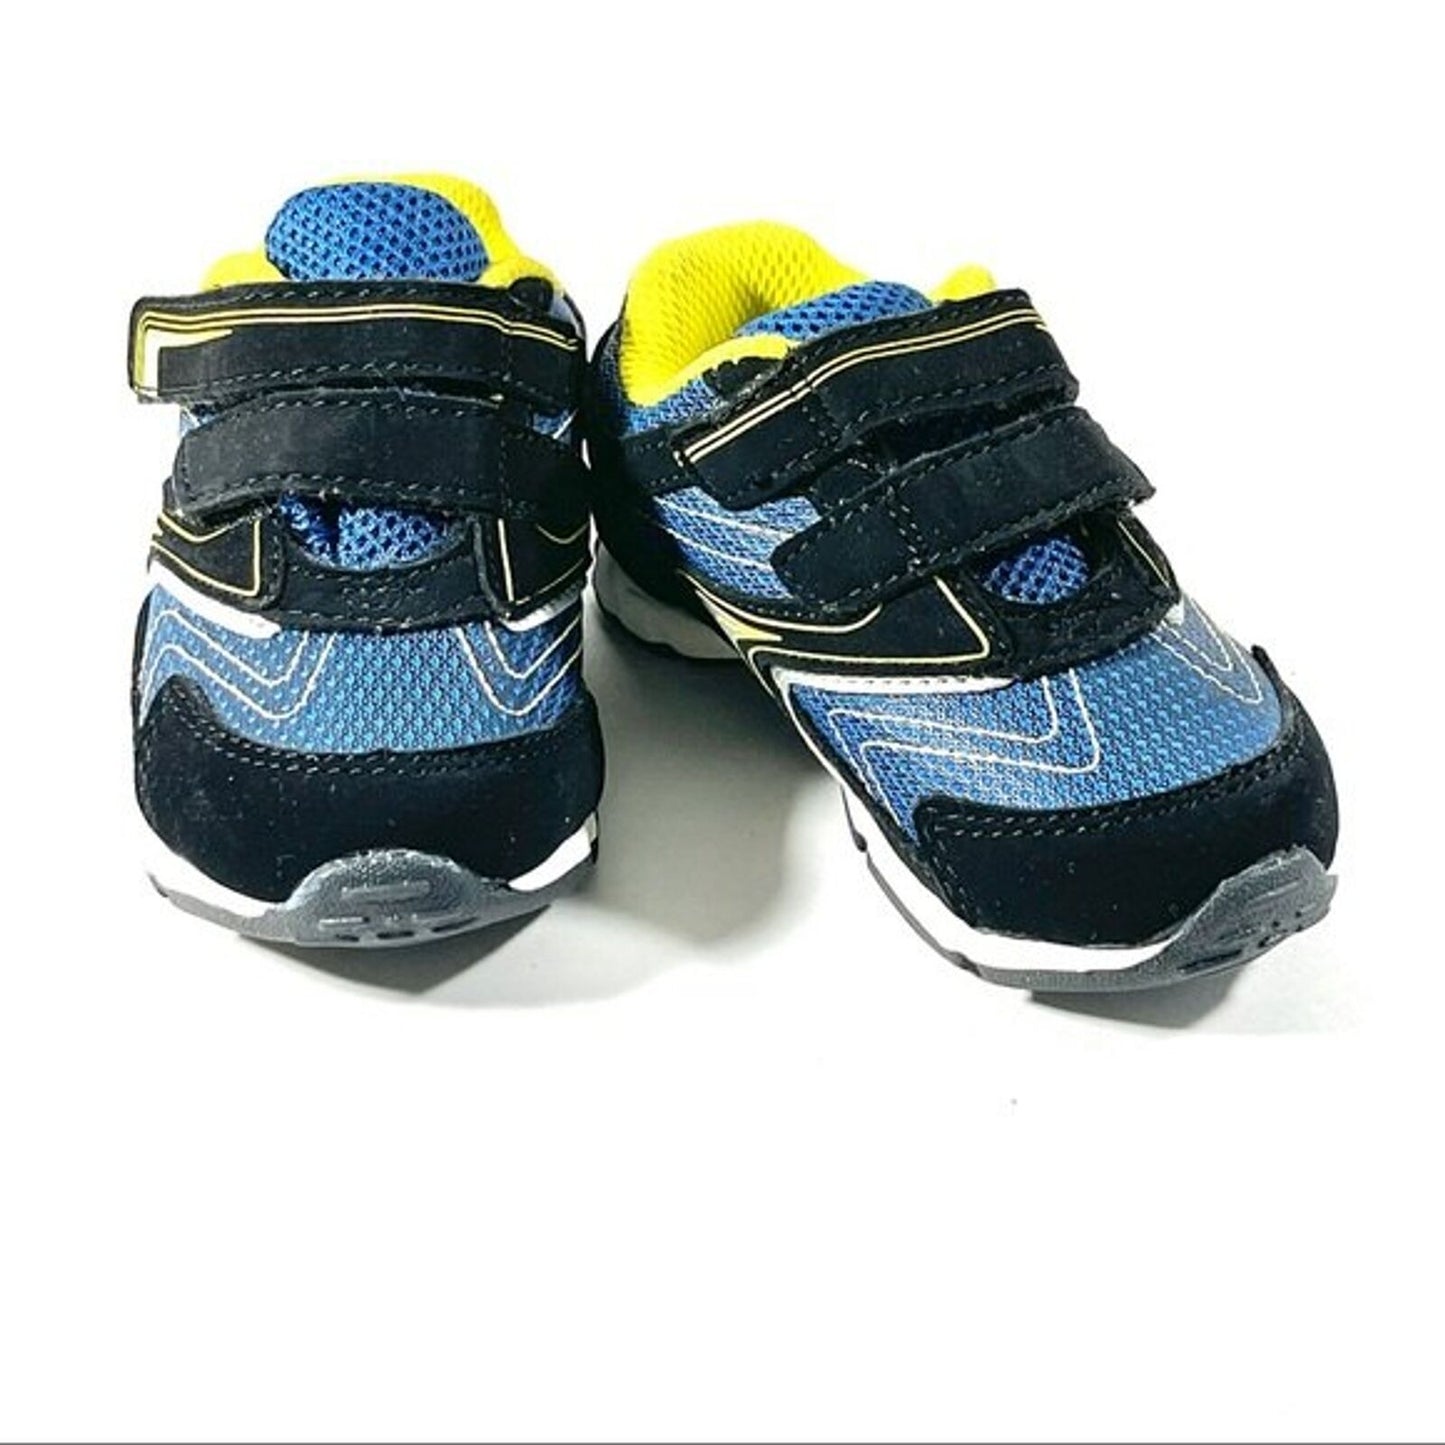 Smart Fit Toddler Sz 5 Boys Sneakers Childrens Shoes Kids Strap Closure